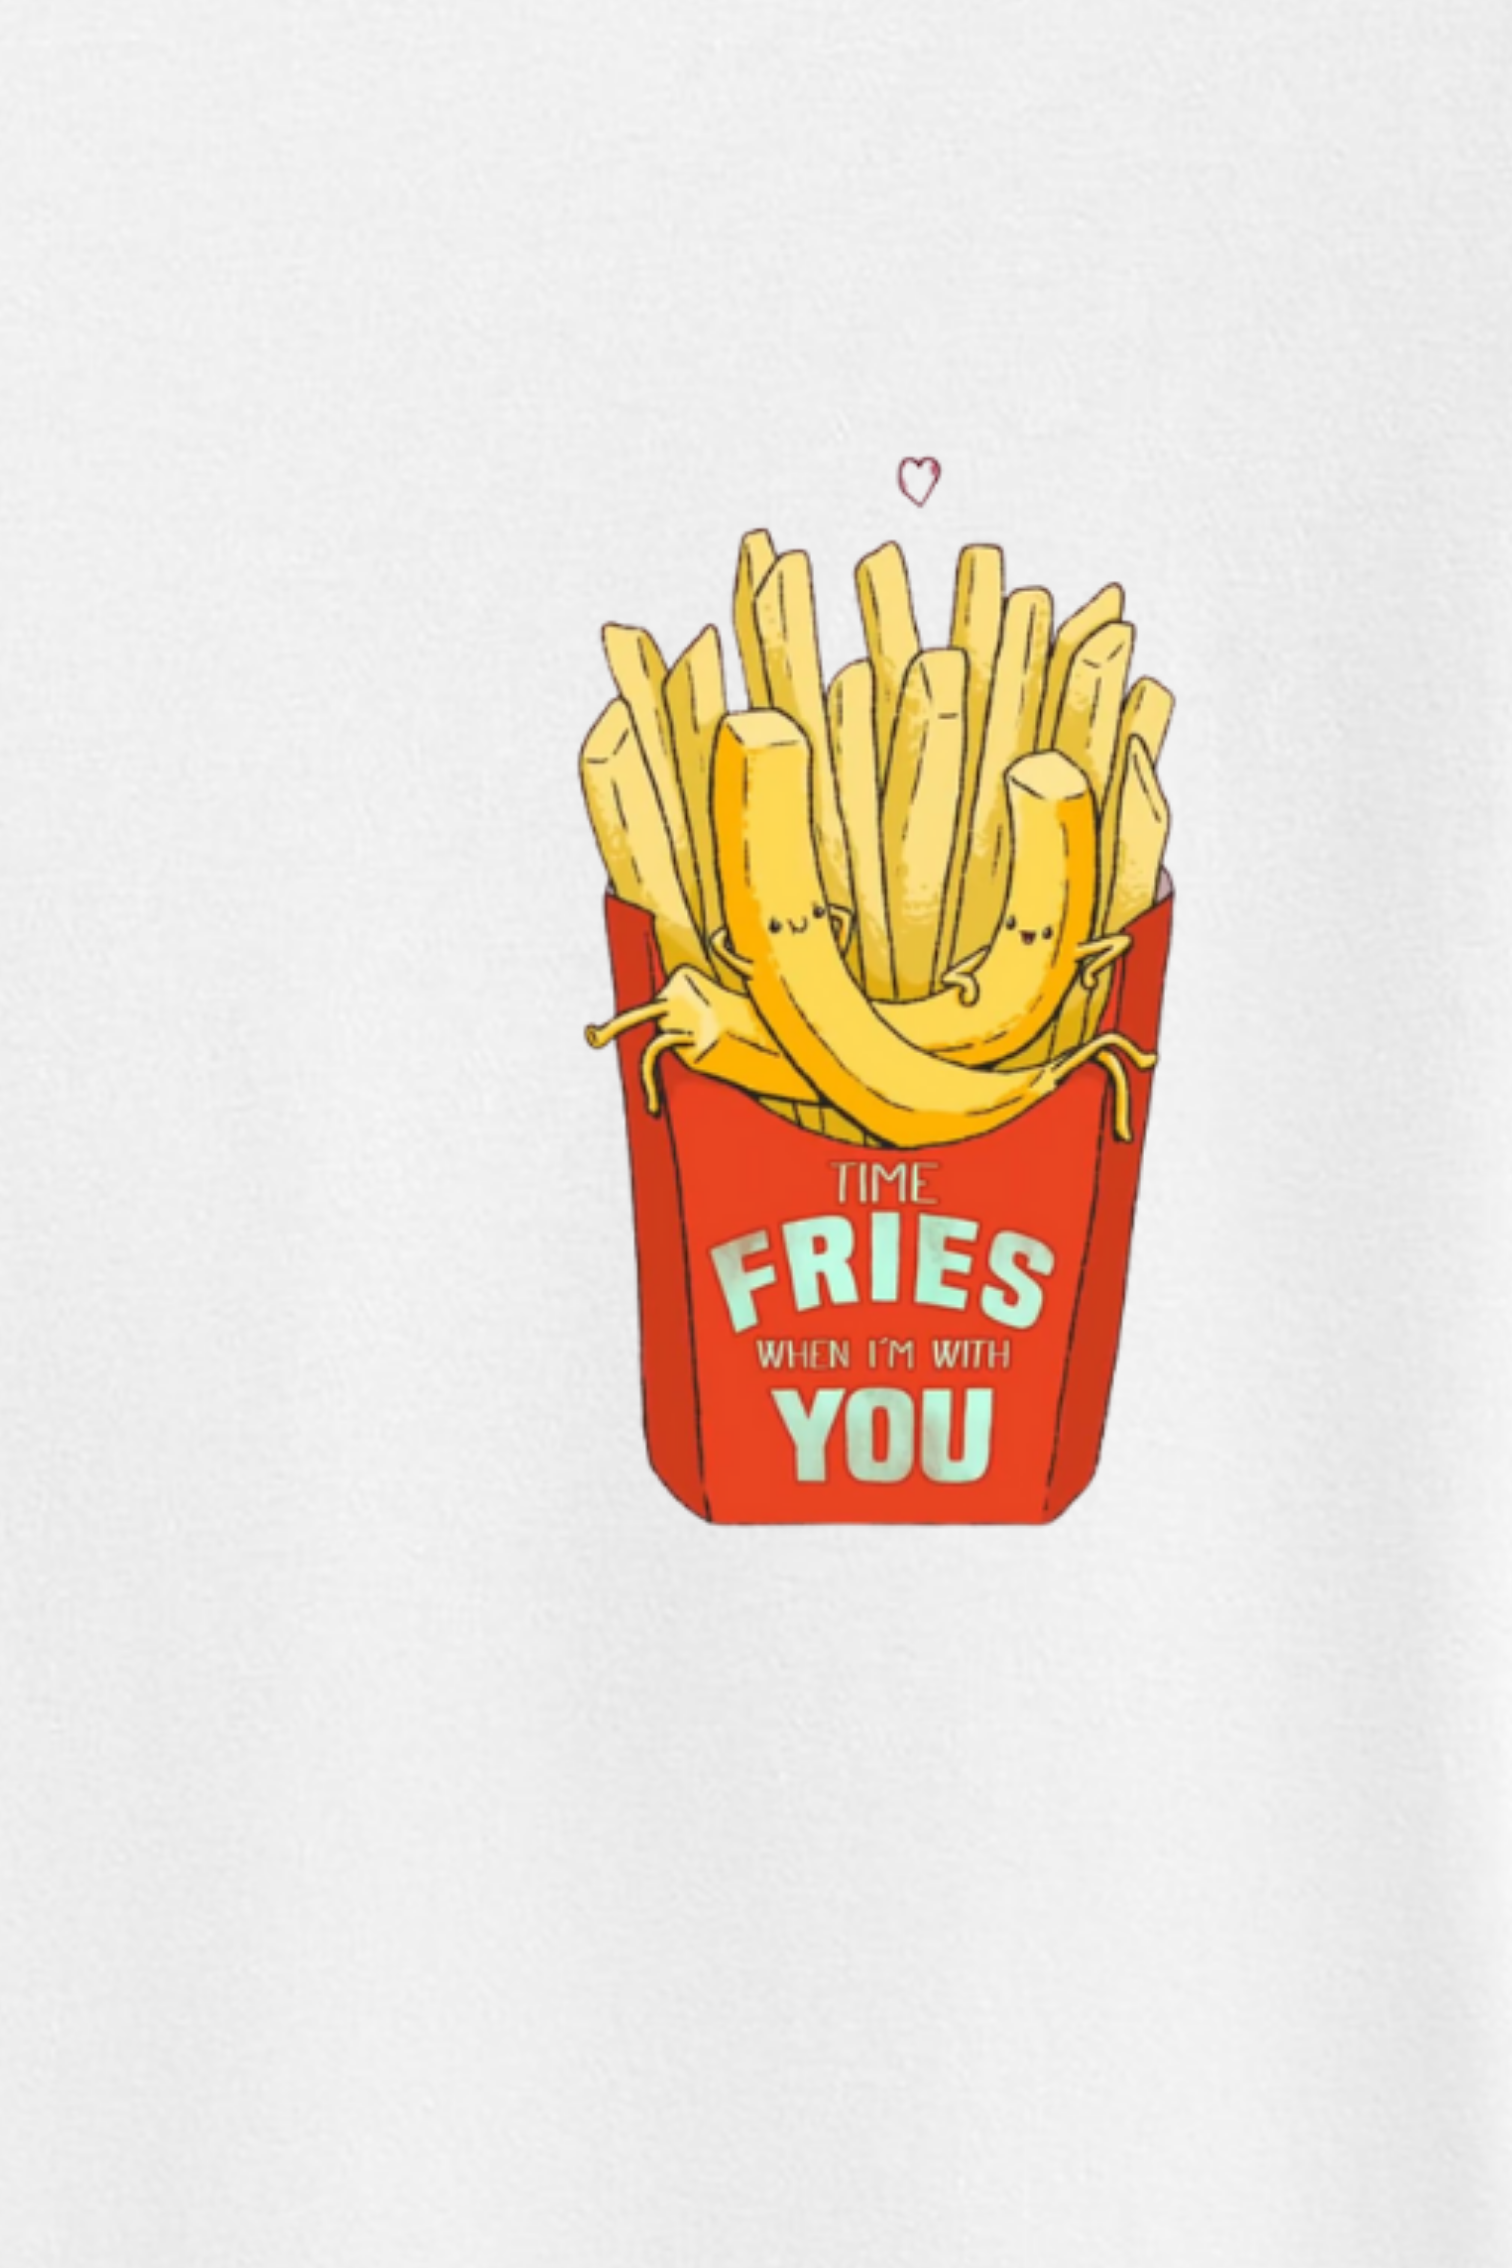 Time fries when i'm with you- Half sleeve t-shirt